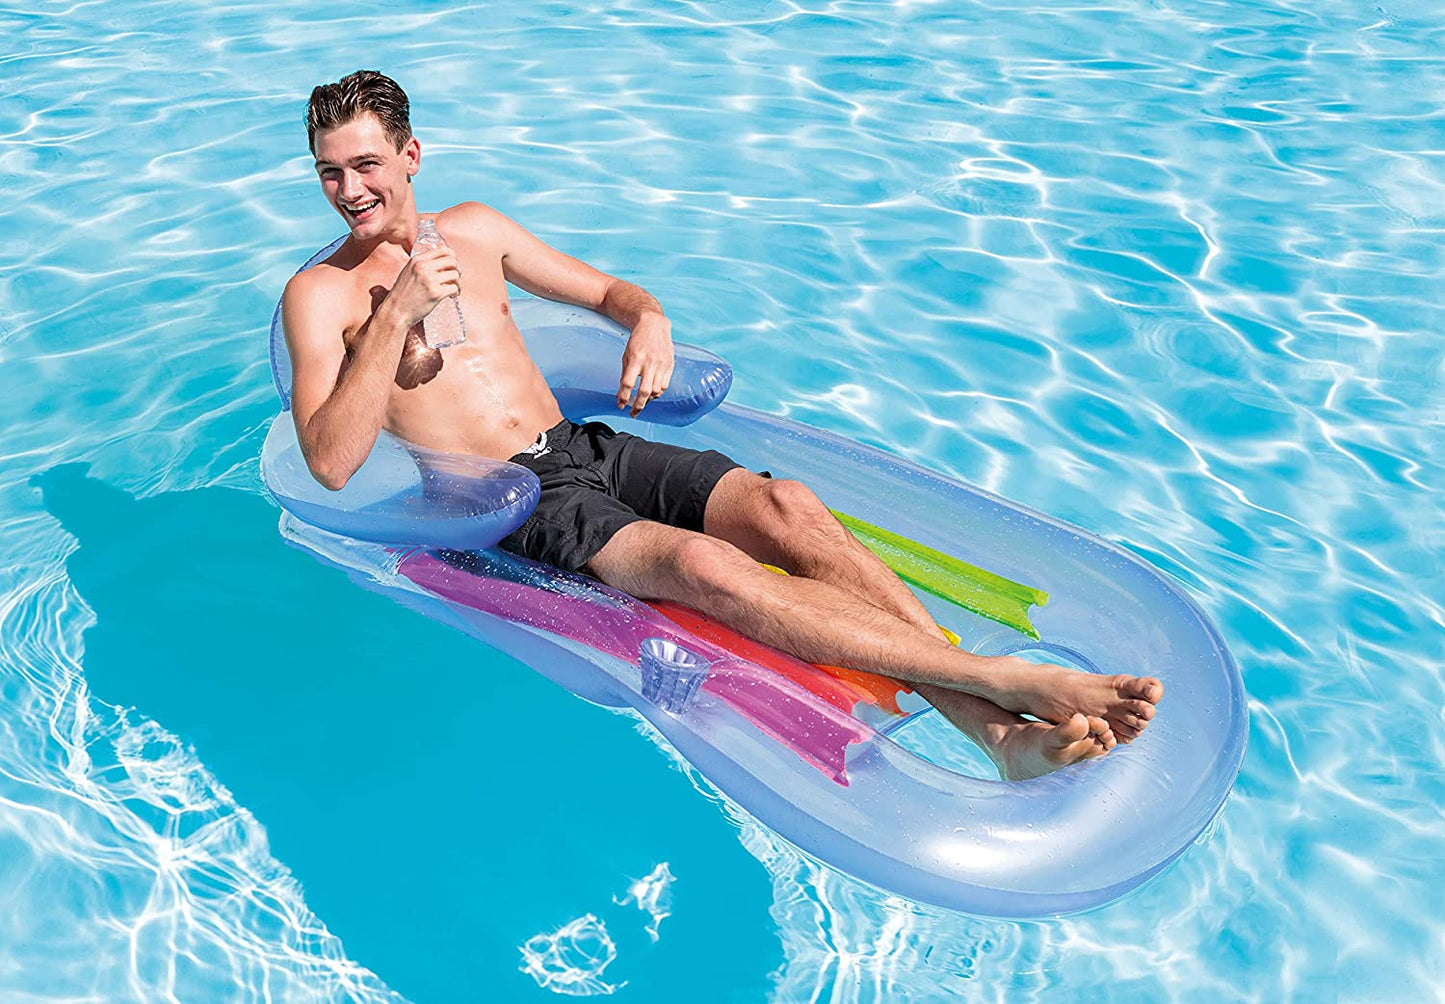 Intex King Kool Lounge - Floating Swimming Pool Lounger with Headrest & Cupholder | Ages 36 months - 50 years | Weight Capacity up to 100 kg